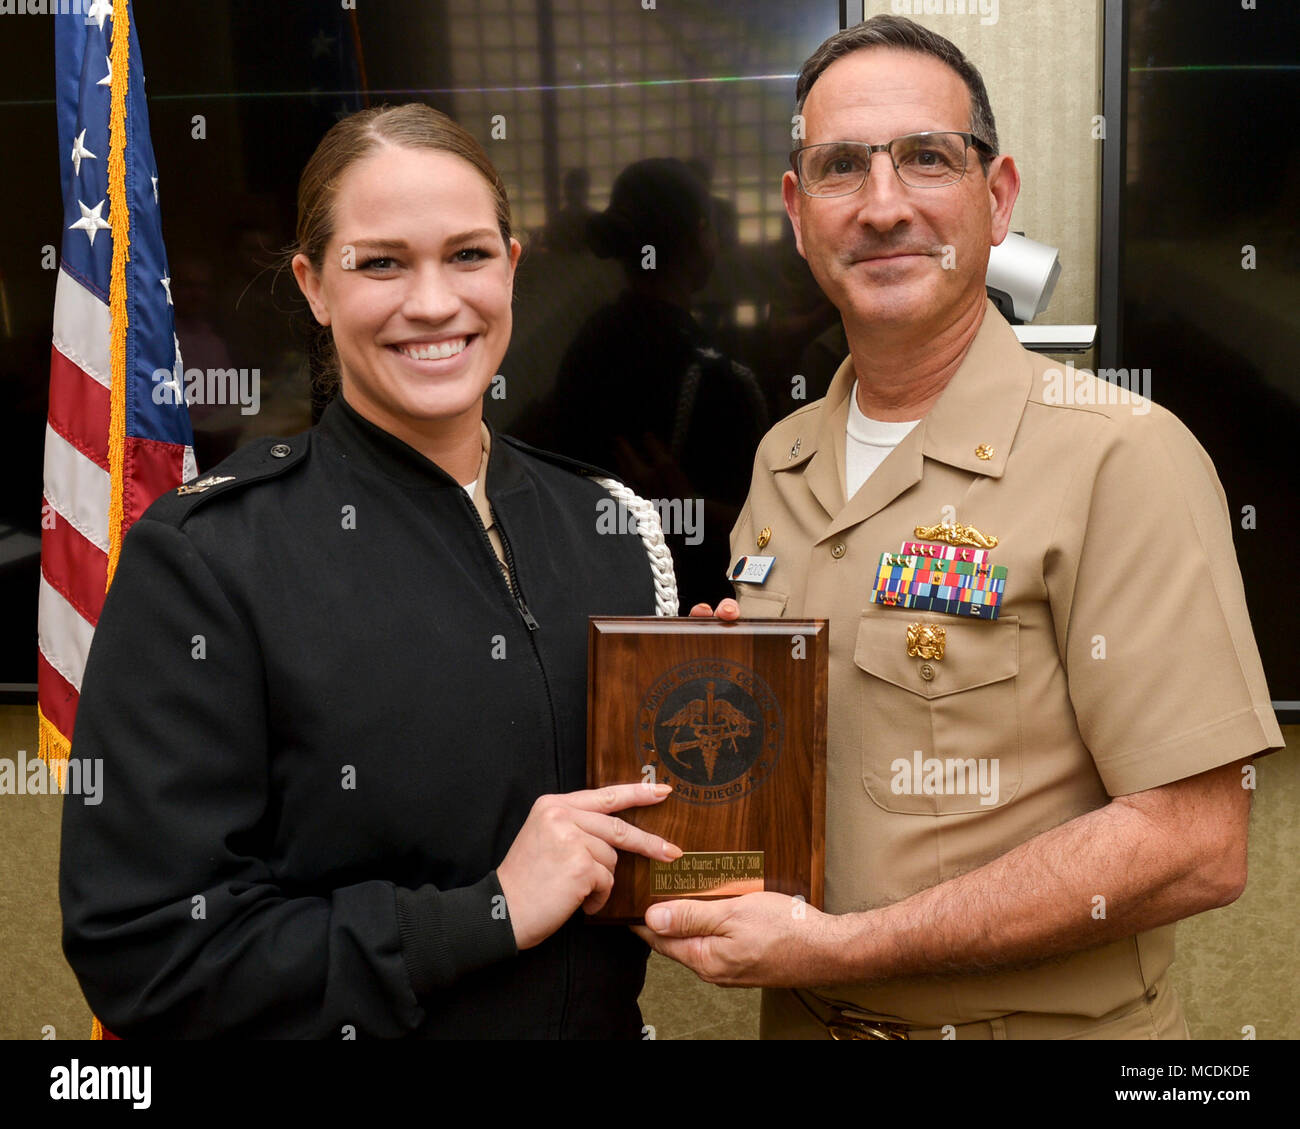 180216-N-PN275-1021 SAN DIEGO (Feb. 16, 2018) CAPT. Joel Roos, Naval Medical Center San Diego Commanding Officer,  presents Hospital Corpsman 2nd Class Shelia BowerRichardson with the Sailor of the Quarter award. H Hospital Corpsman 2nd Class BowerRichardson received the award for her exceptional work and devotion to duty. (U.S. Navy Photo by Mass Communication Specialist 2nd Class Zachary Kreitzer) Stock Photo